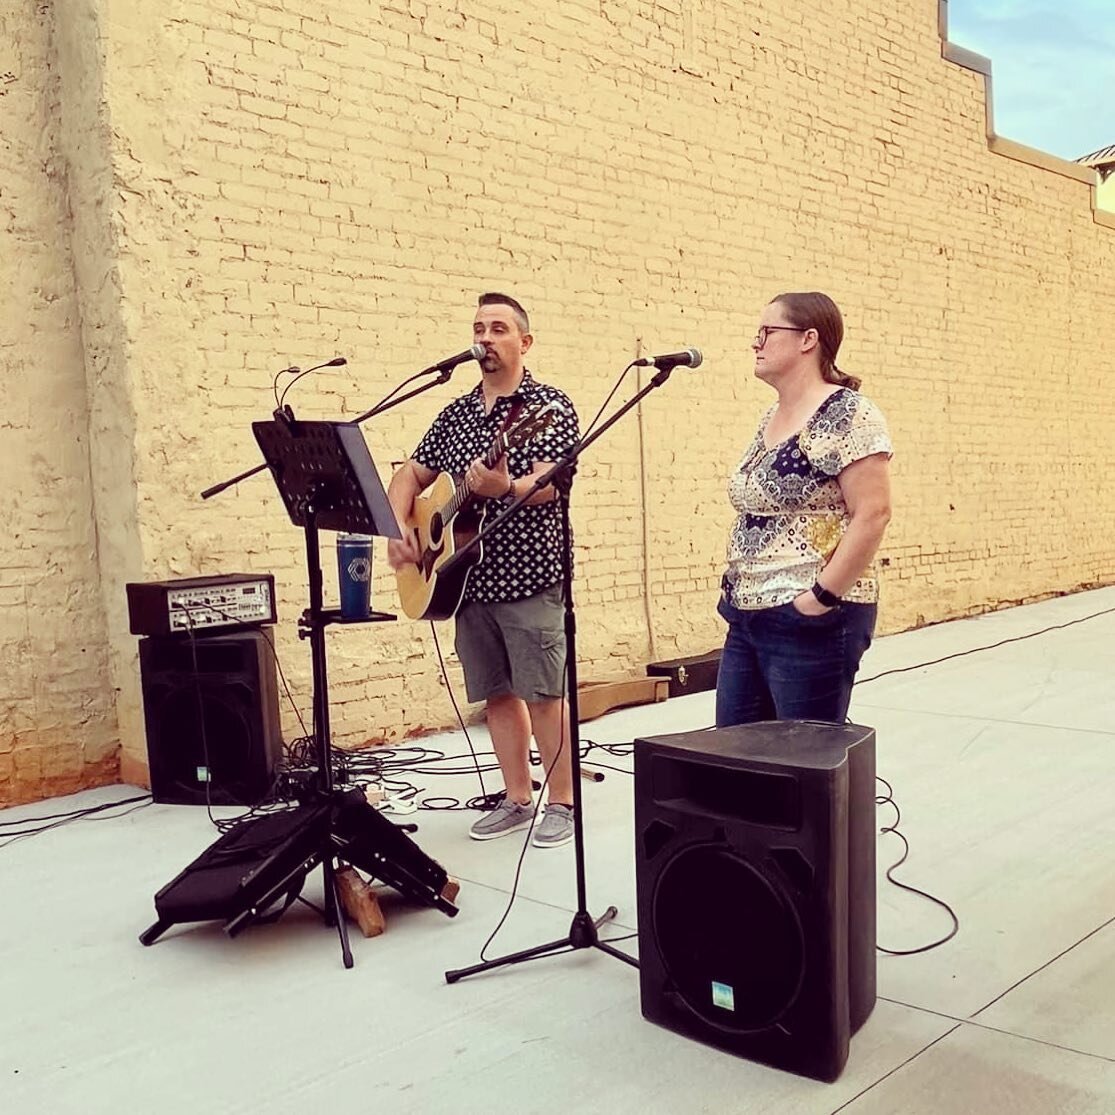 Had a great time playing at @abbottsfrozencustardgreersc for Music In The Alley!